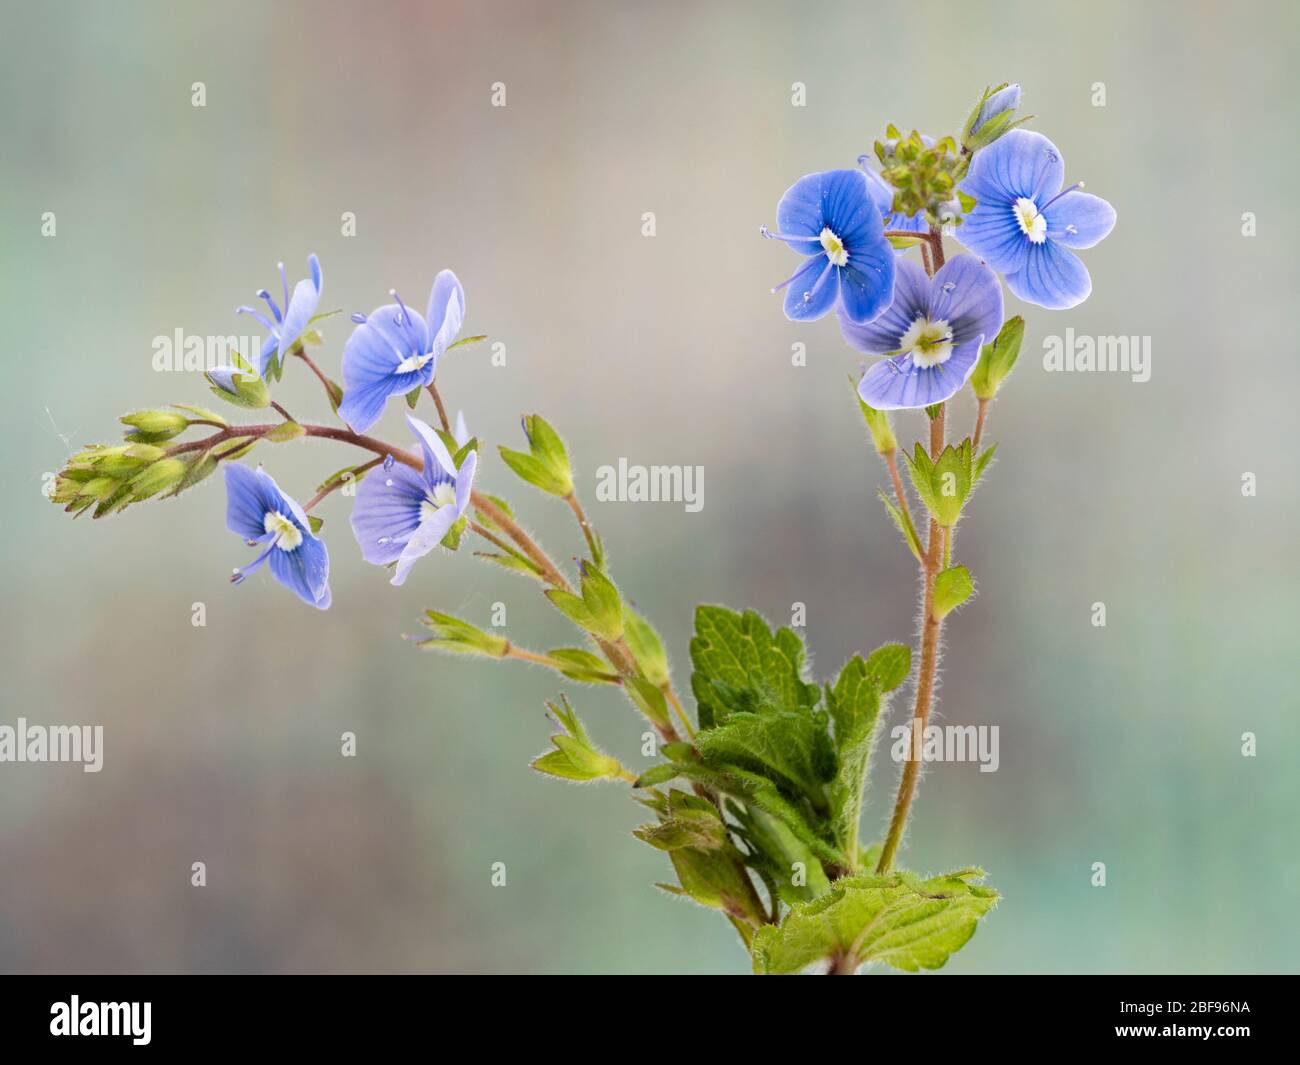 Stem and small blue flowers of the creeping UK wildflower, germander speedwell, Veronica chamaedrys Stock Photo